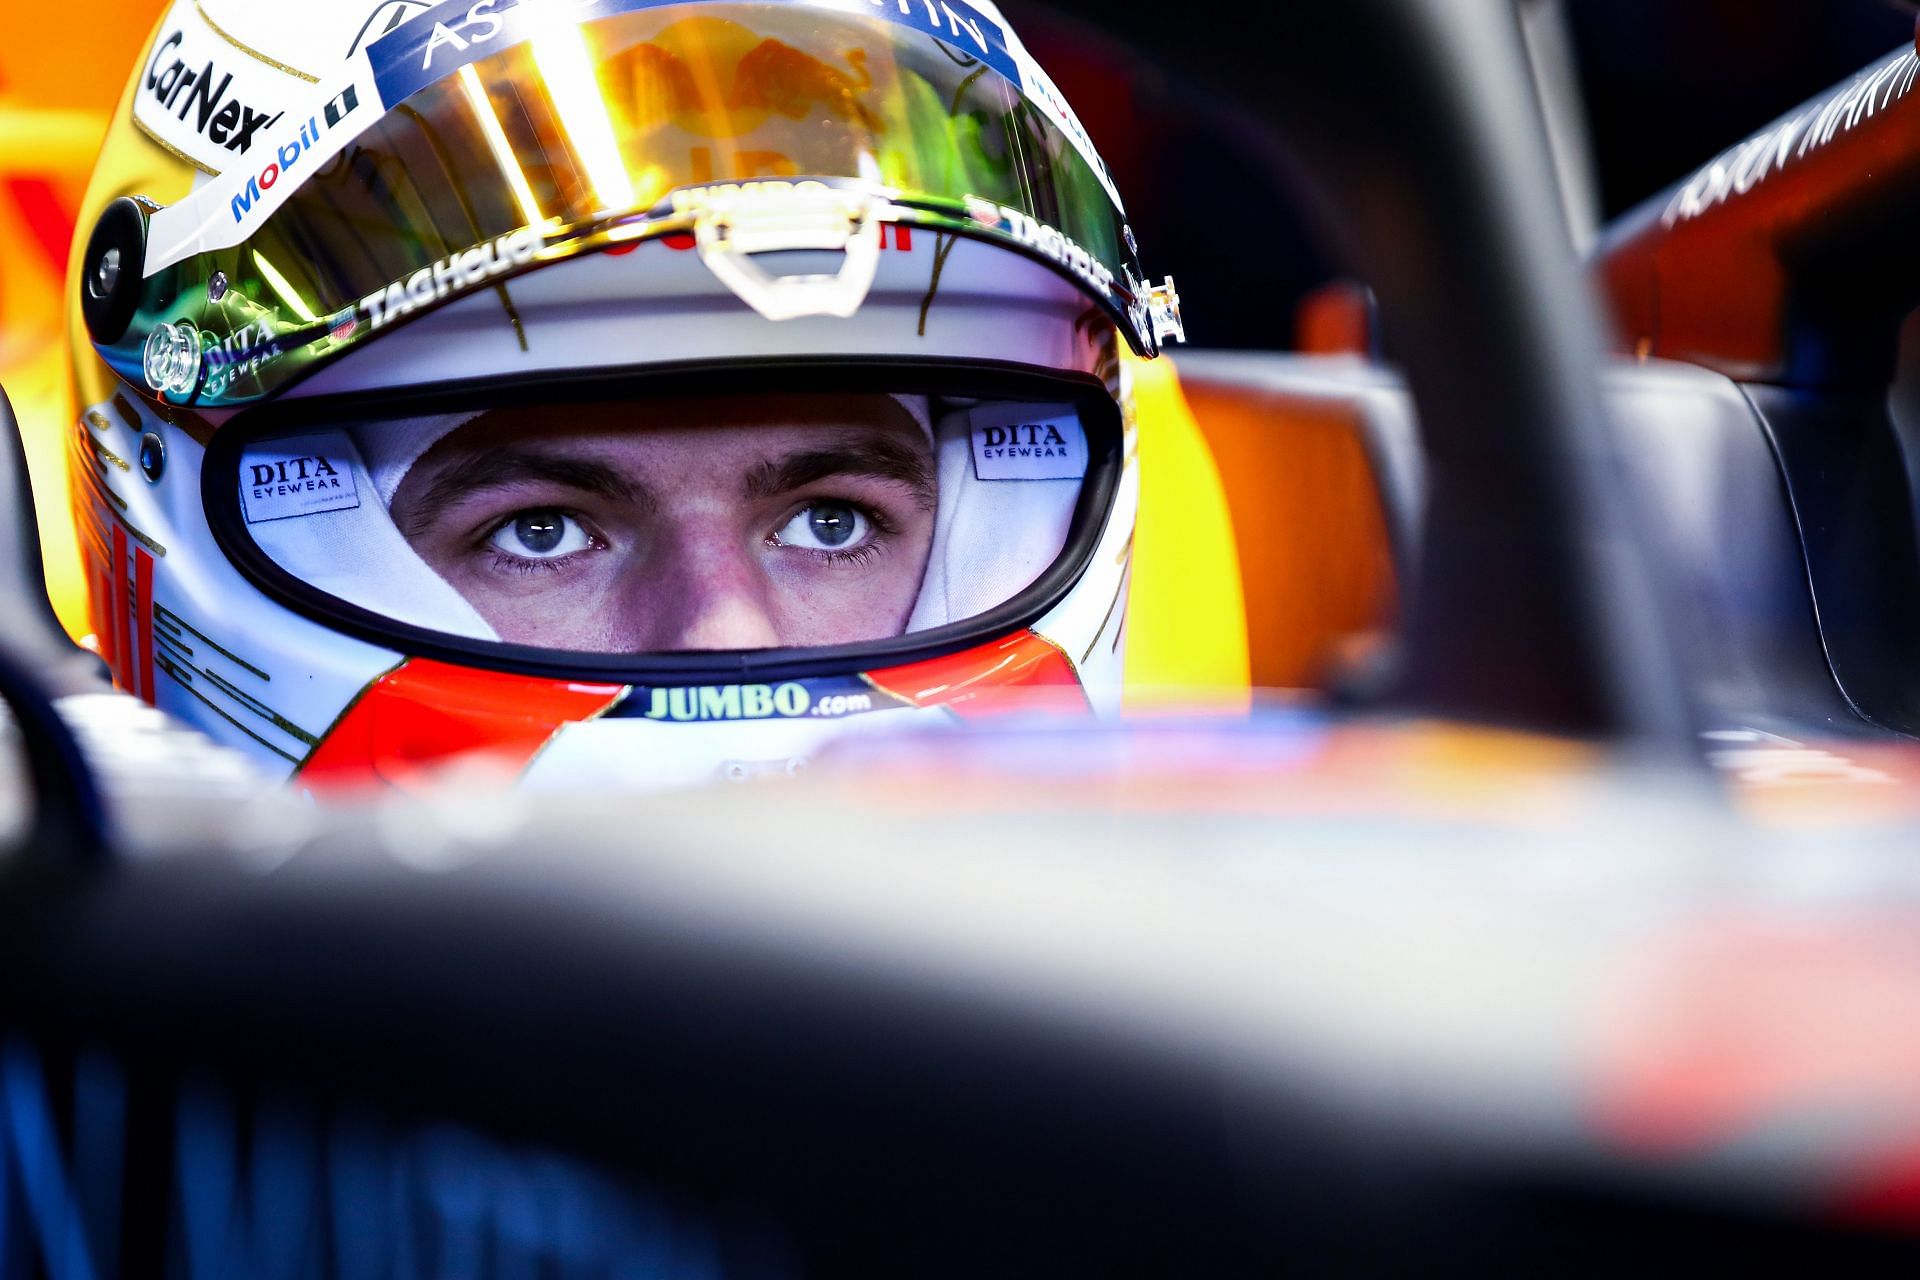 Reigning F1 world champion Max Verstappen will be the first driver since Sebastian Vettel in 2014 to use the #1 on his car.